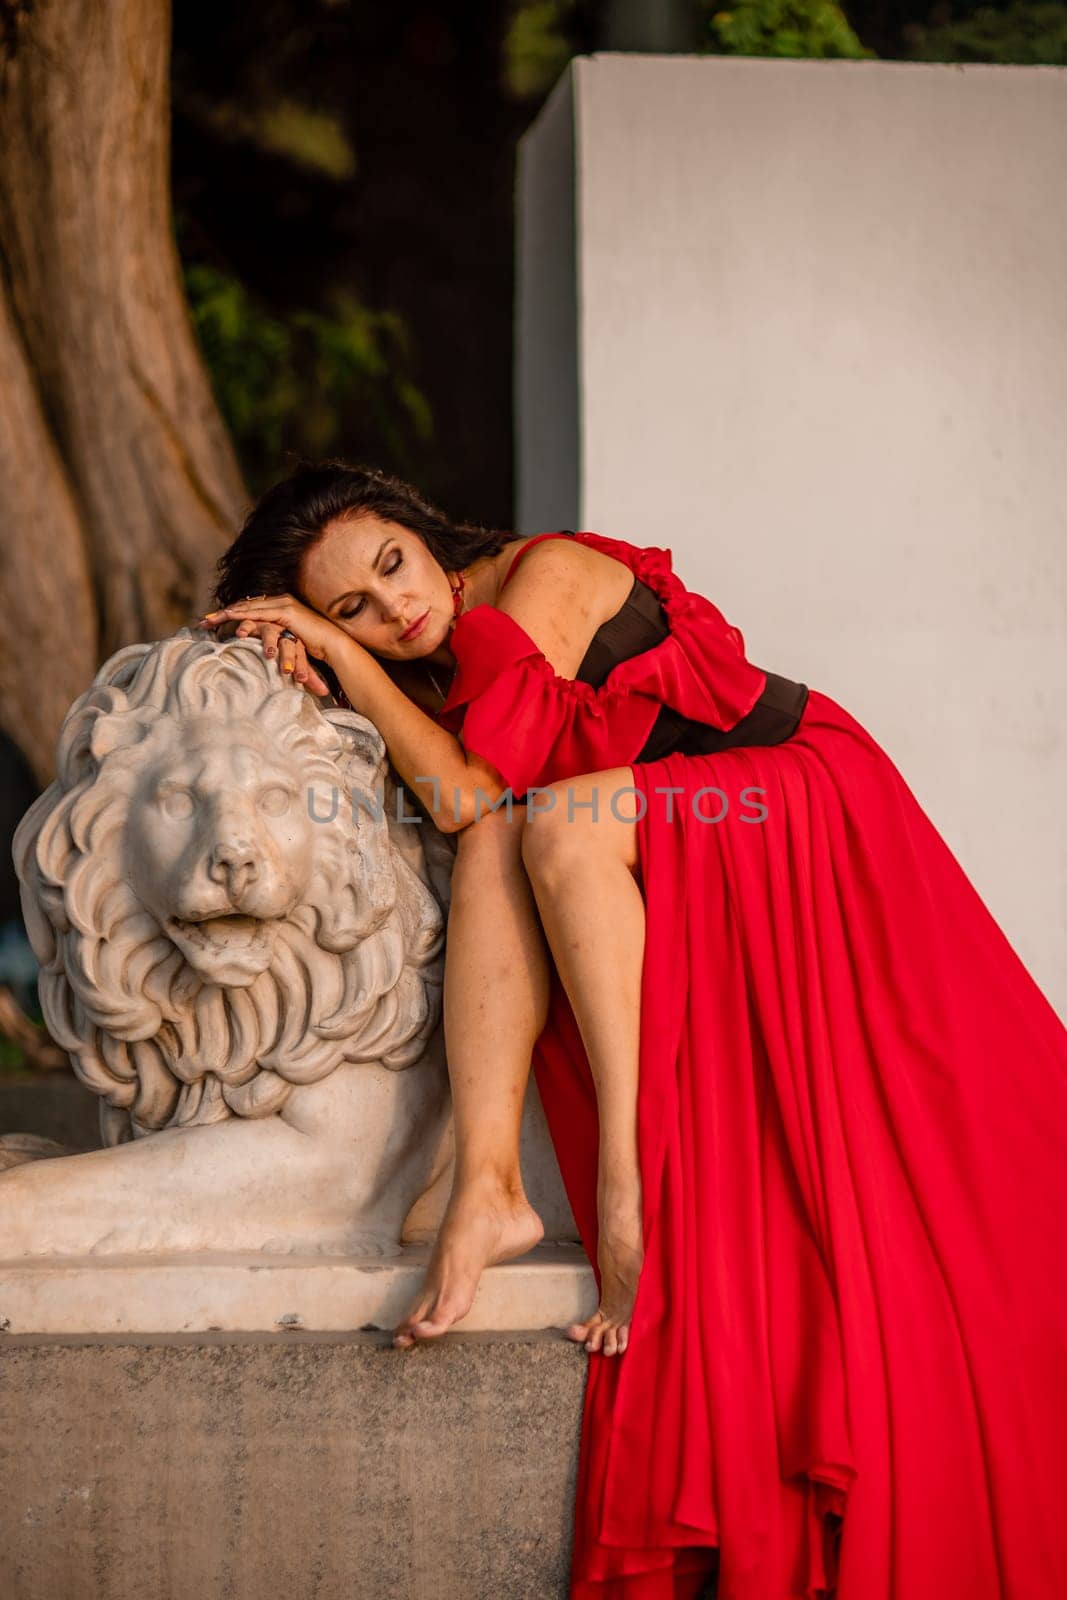 A woman in a red dress is sitting on a stone lion statue. The statue is white and has a lion's head. The woman is wearing a black belt and is looking at the camera. The scene has a calm